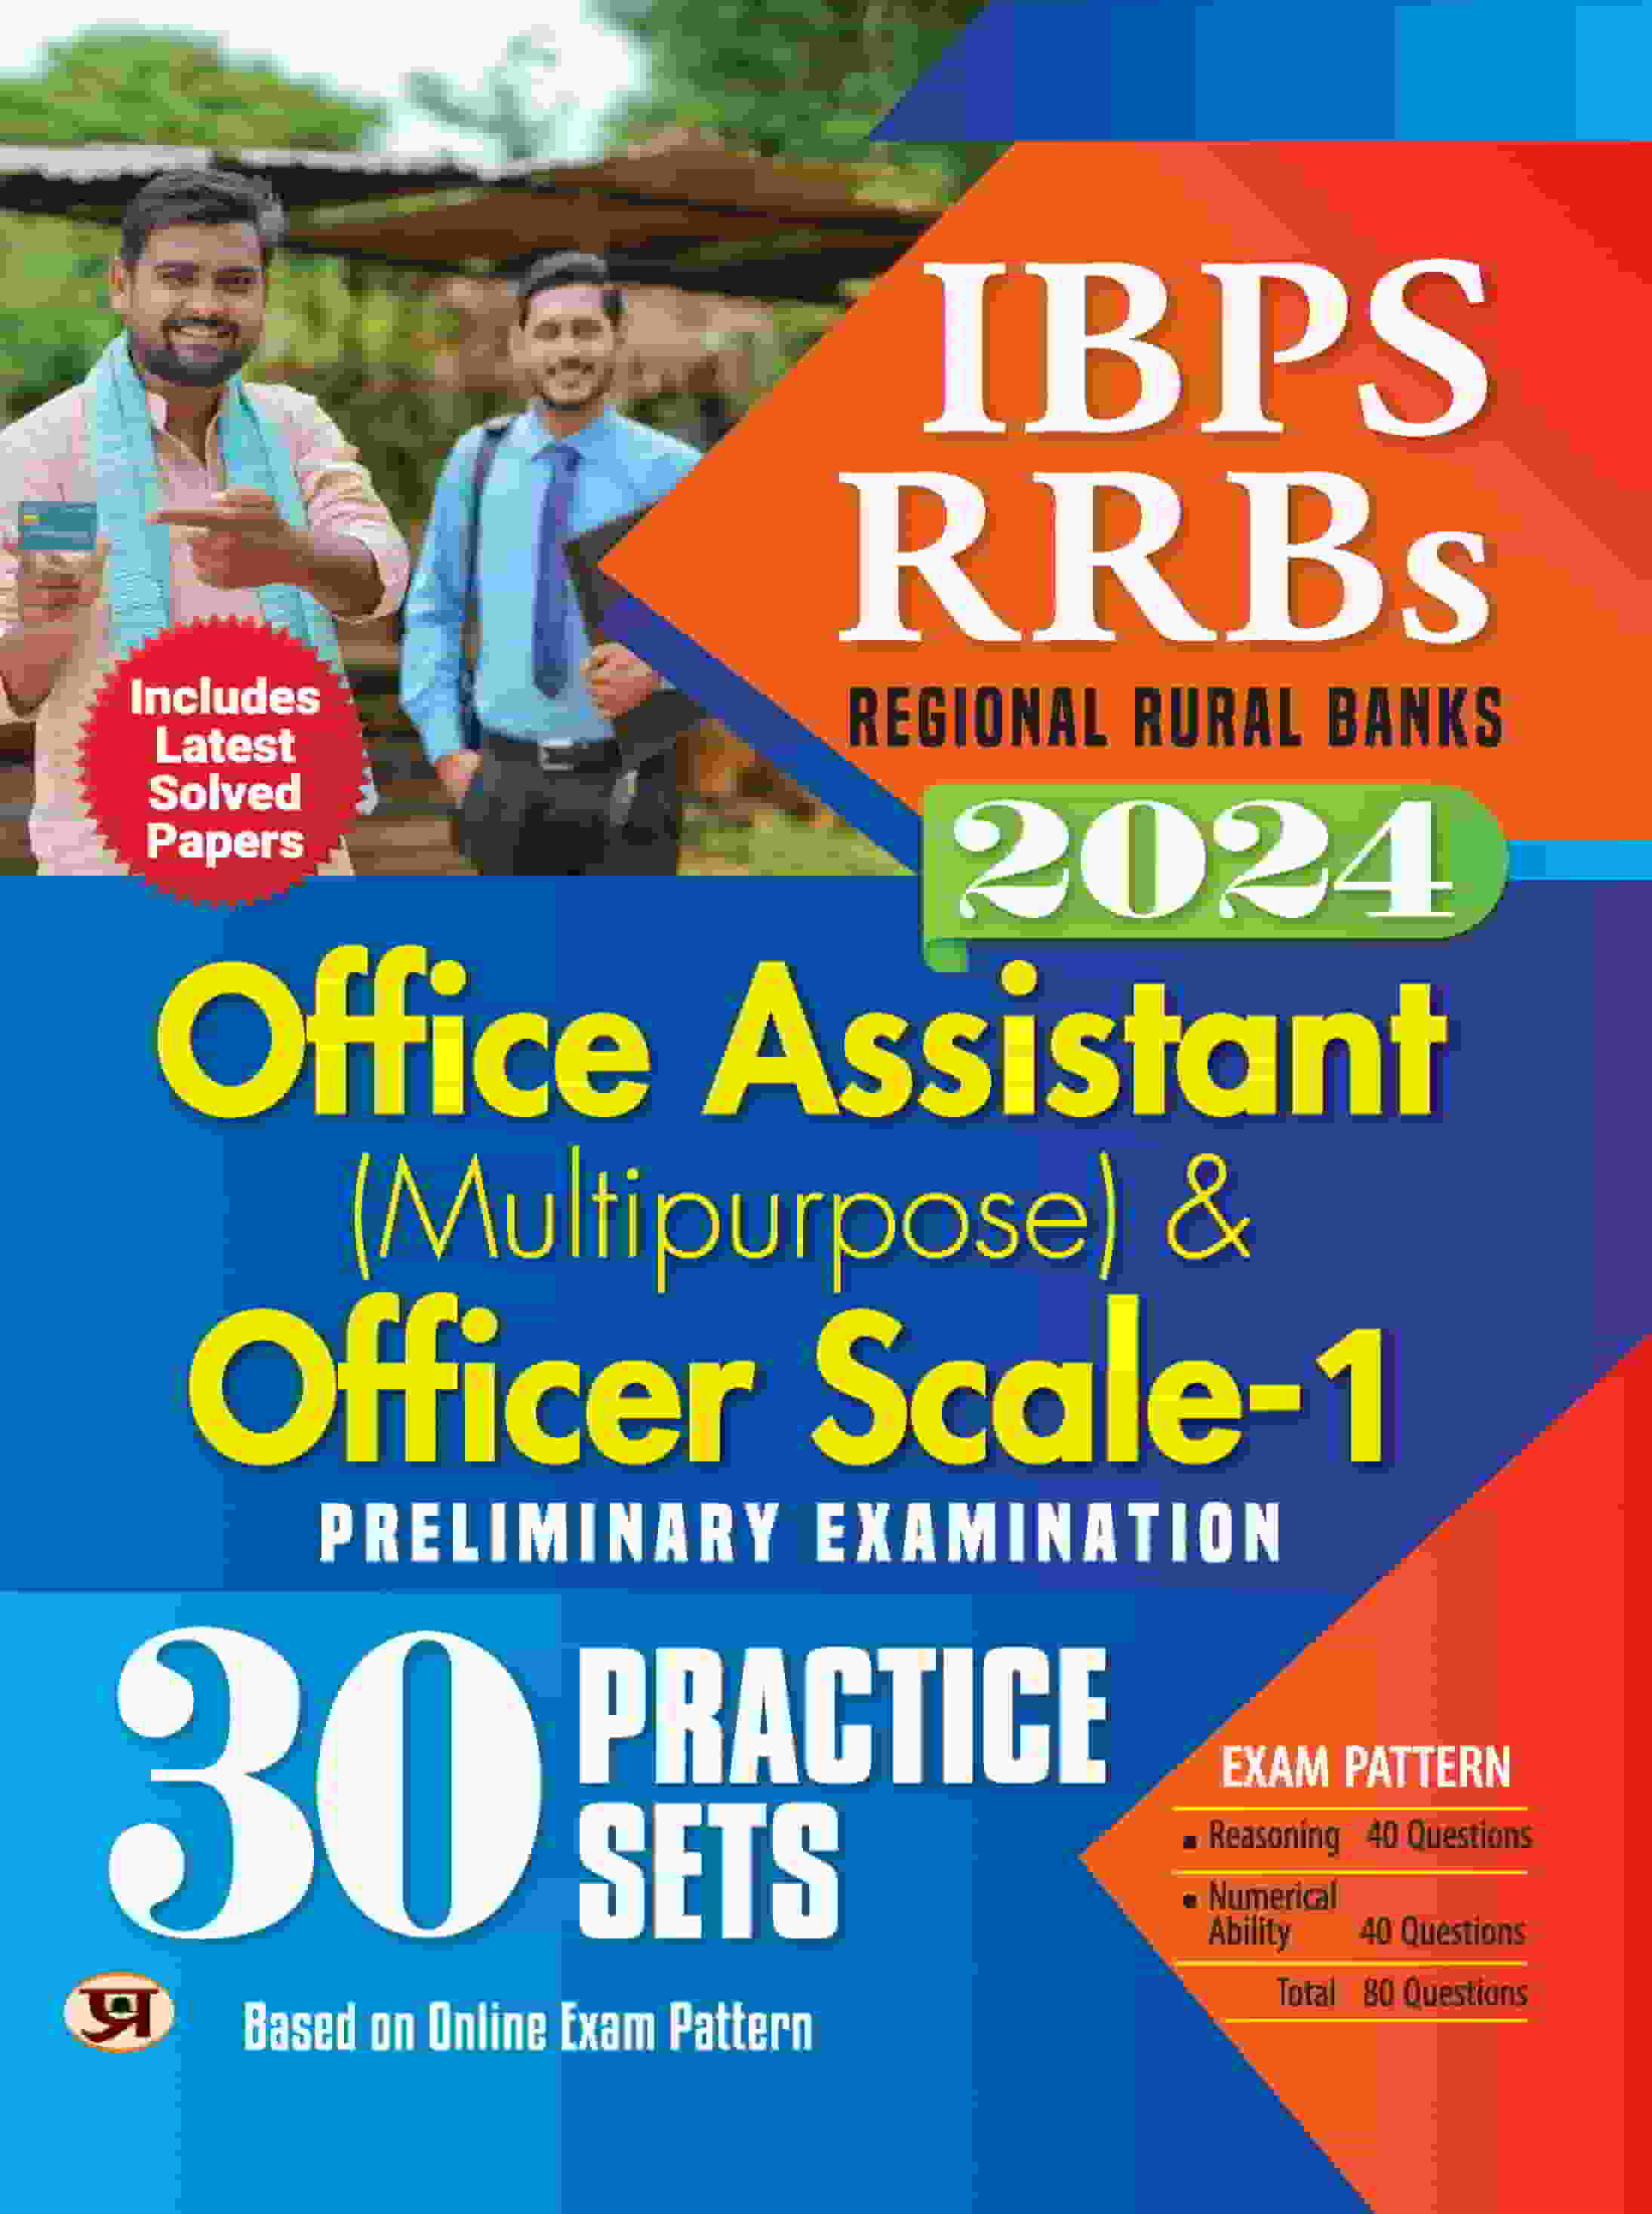 IBPS-RRBs Office Assistant (Multipurpose) & Officer  Scale-1 Preliminary Examination-2024  30 Practice Sets | Includes Latest Solved Papers (Regional Rural Bank) Based On Online Exam Pattern